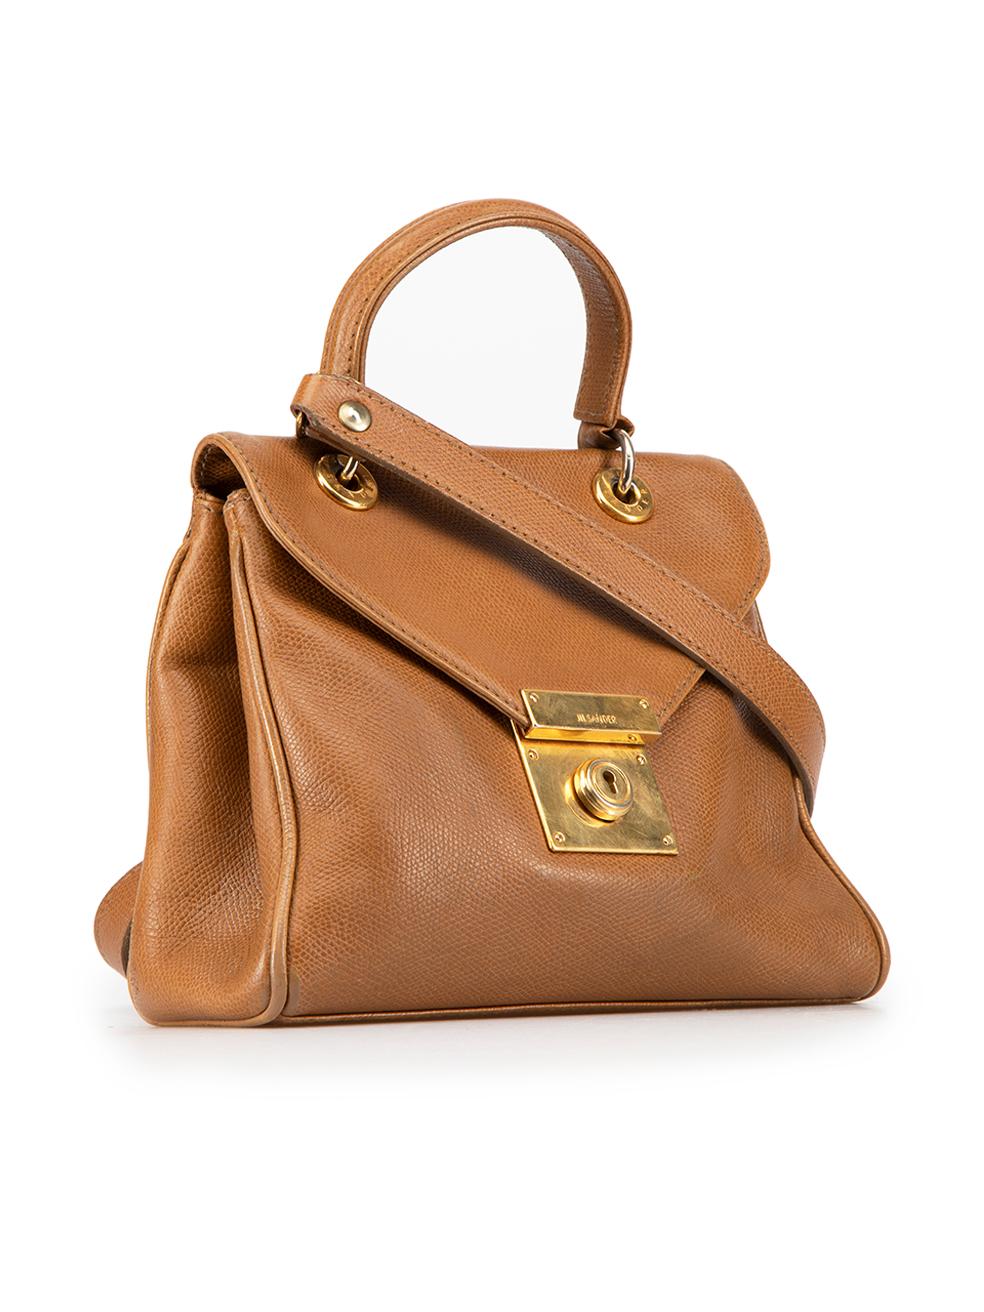 CONDITION is Good. General wear to handbag is evident. Moderate signs of wear to outer corners with light wear to piping and tarnished hardware on this used Jil Sander designer resale item. Crossbody strap included.
 
 Details
 Brown
 Leather
 Mini